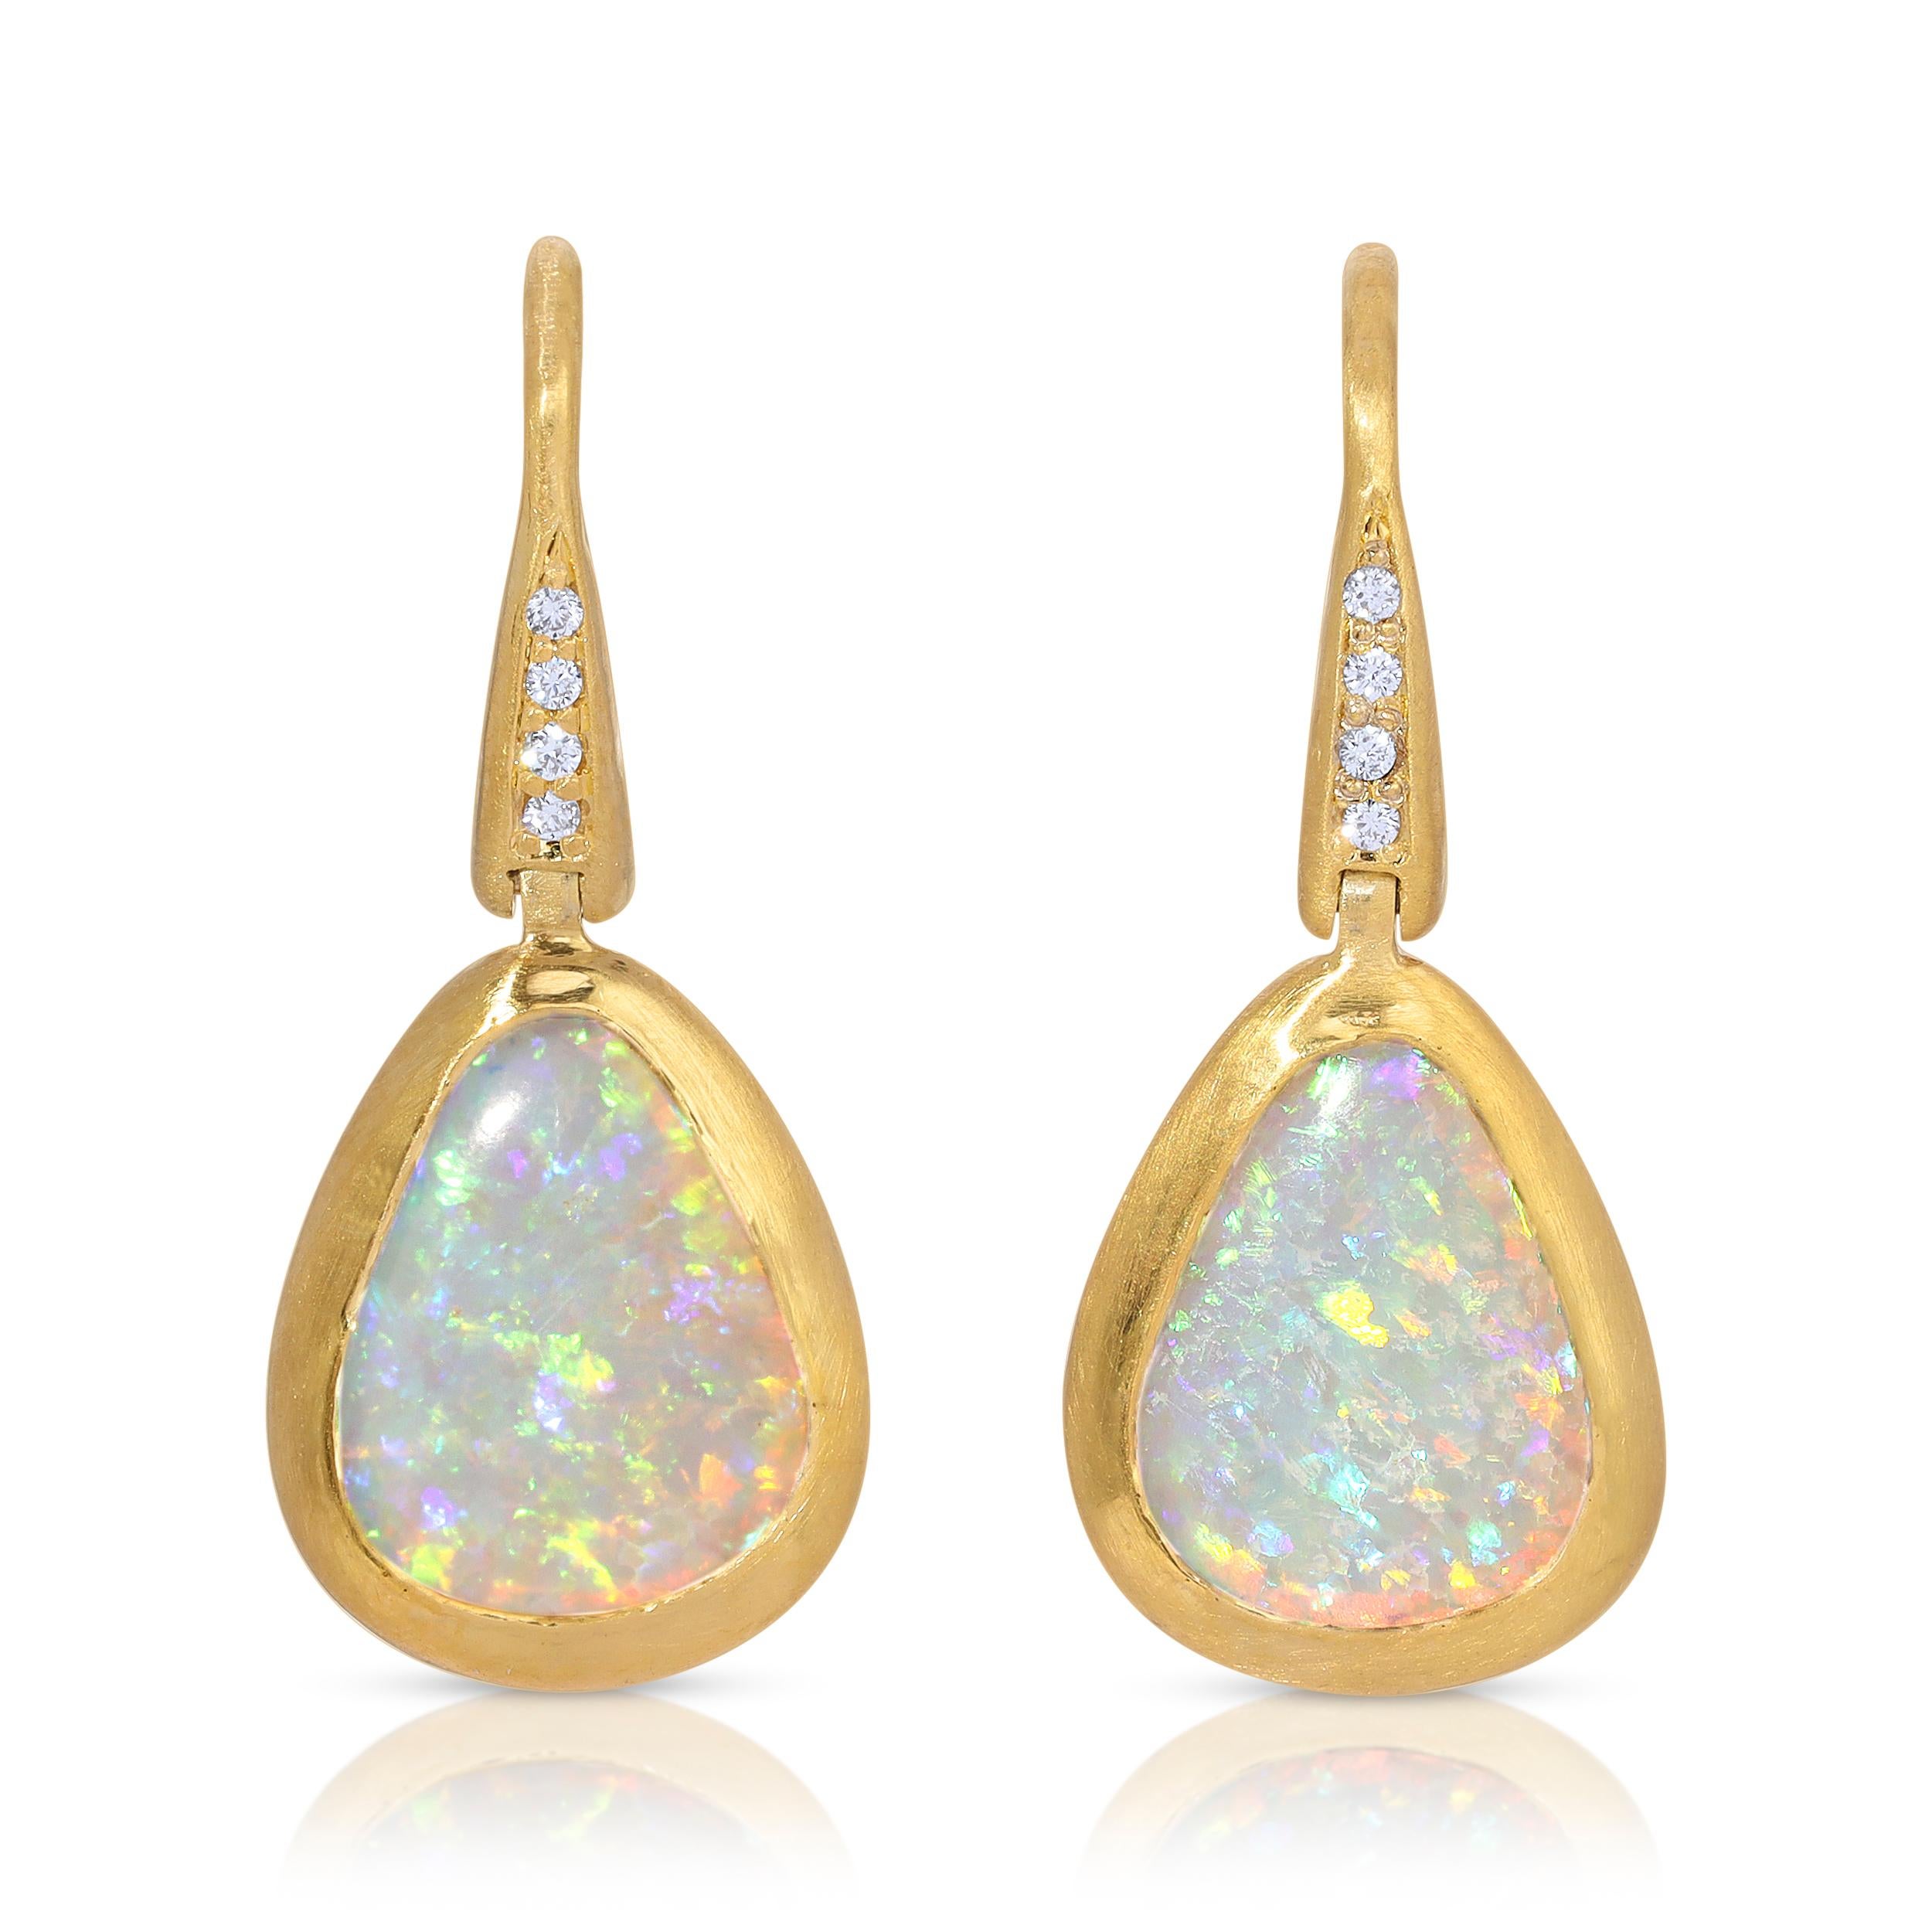 These earthy Winton Australian Crystal Opal Earrings are 1.68ct and are accented with .04ct vs quality Diamonds set in 18k Matte Yellow Gold.  The Opal drop is attached by a hinge for movement. 